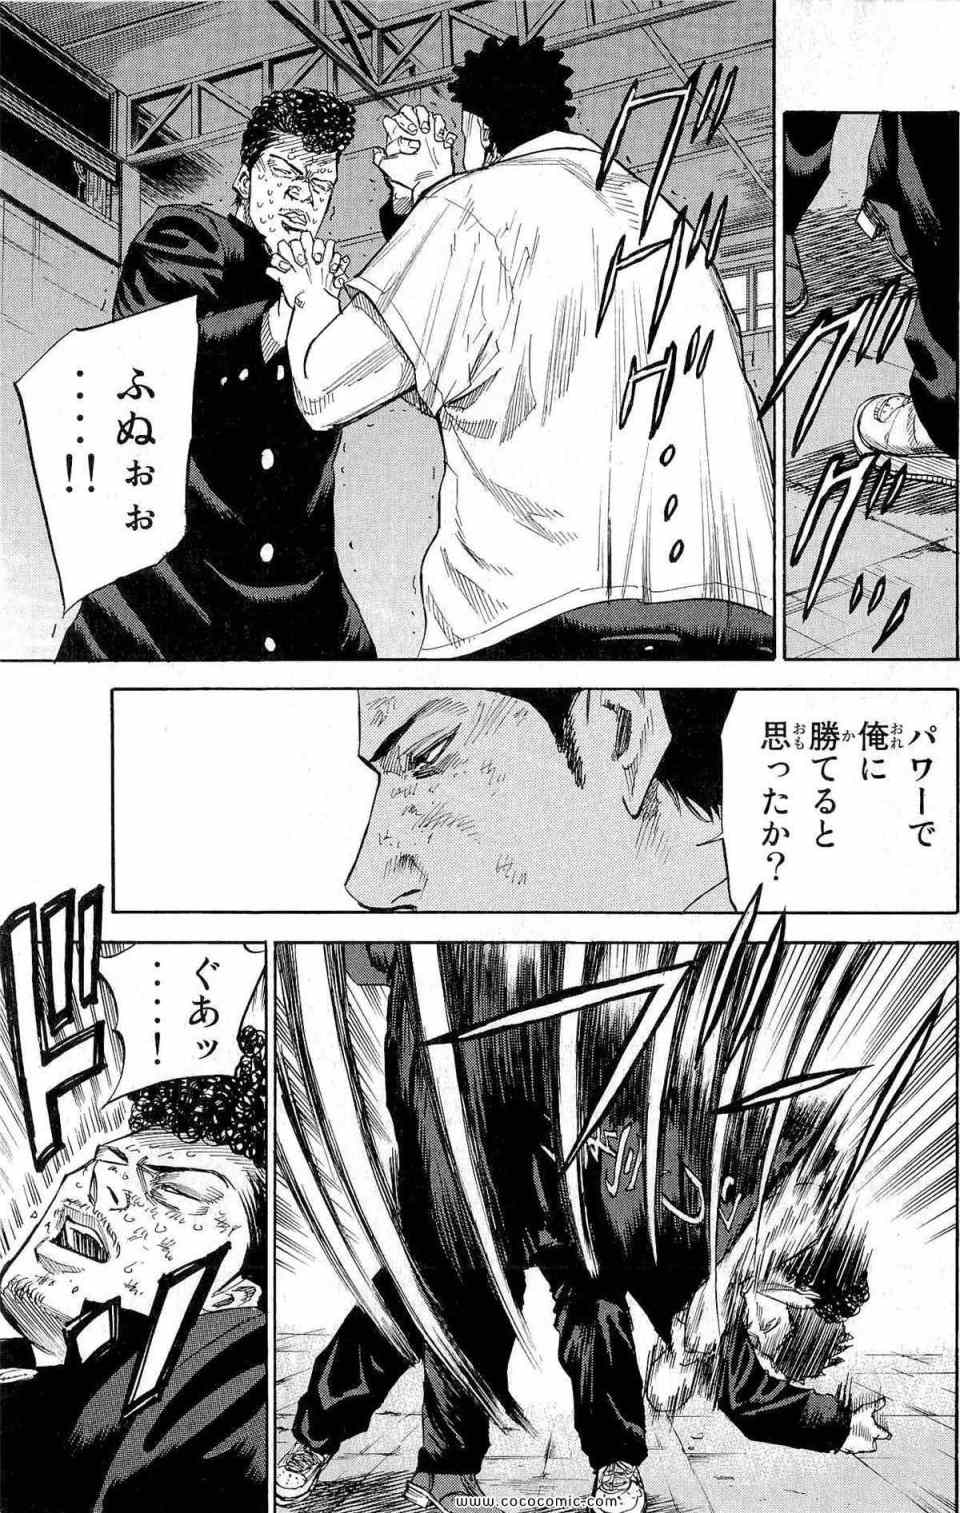 《A-BOUT!(日文)》漫画 A-BOUT! 04卷